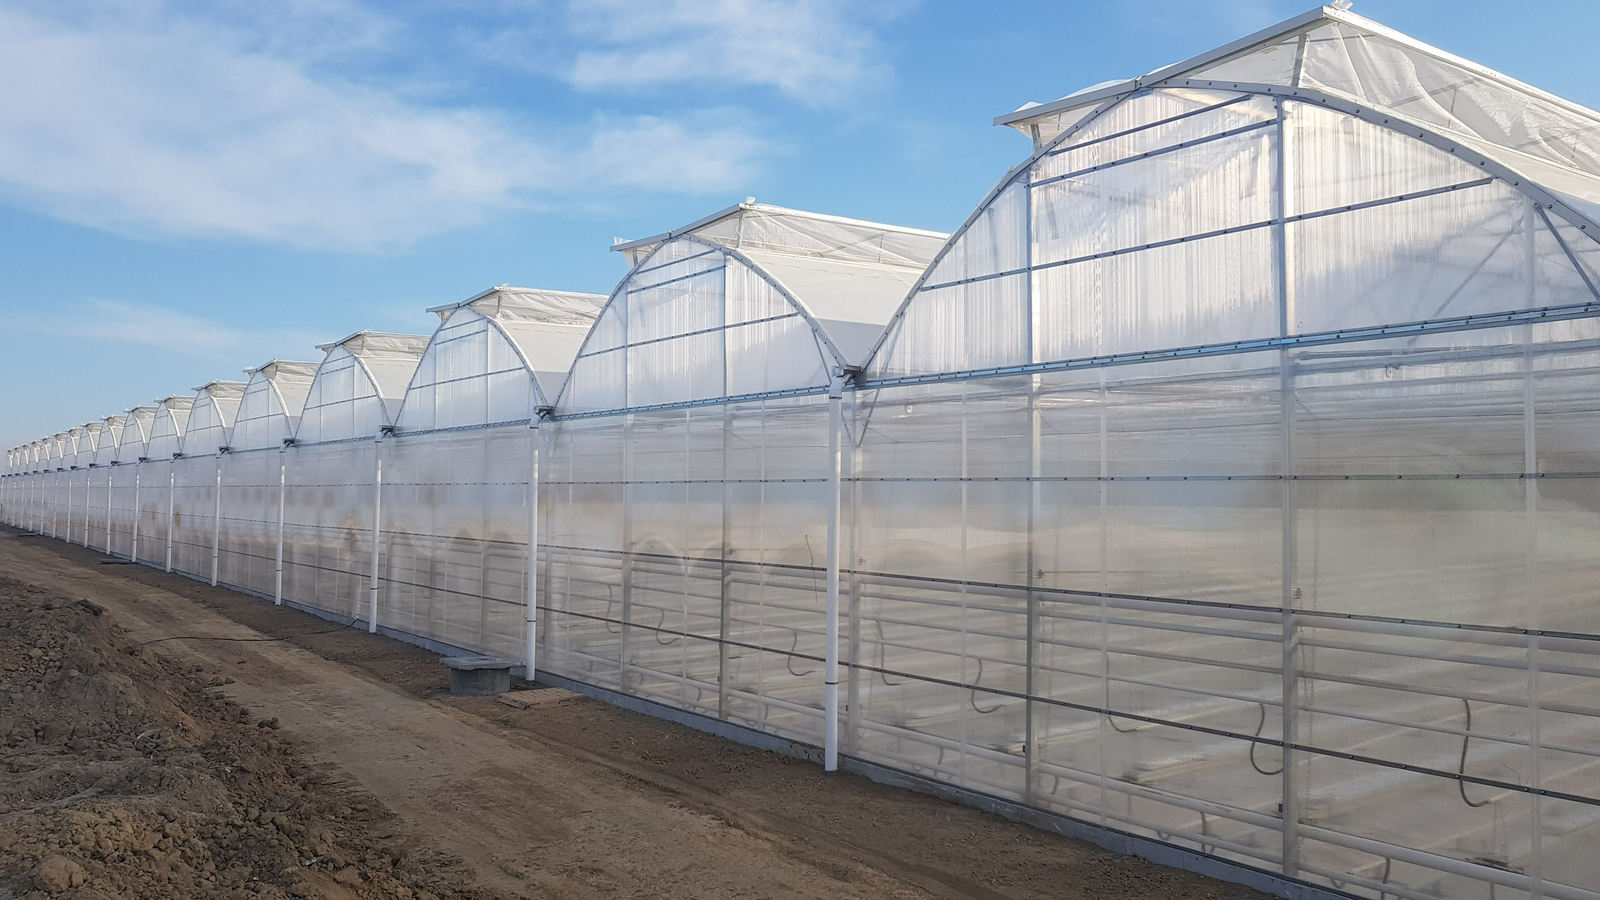 greenhouse for medical cannabis growing with roof ventilation and light structure by Netafim greenhouse projects. Especially fit for warmer climates where a polyhouse is preferred over a glass house